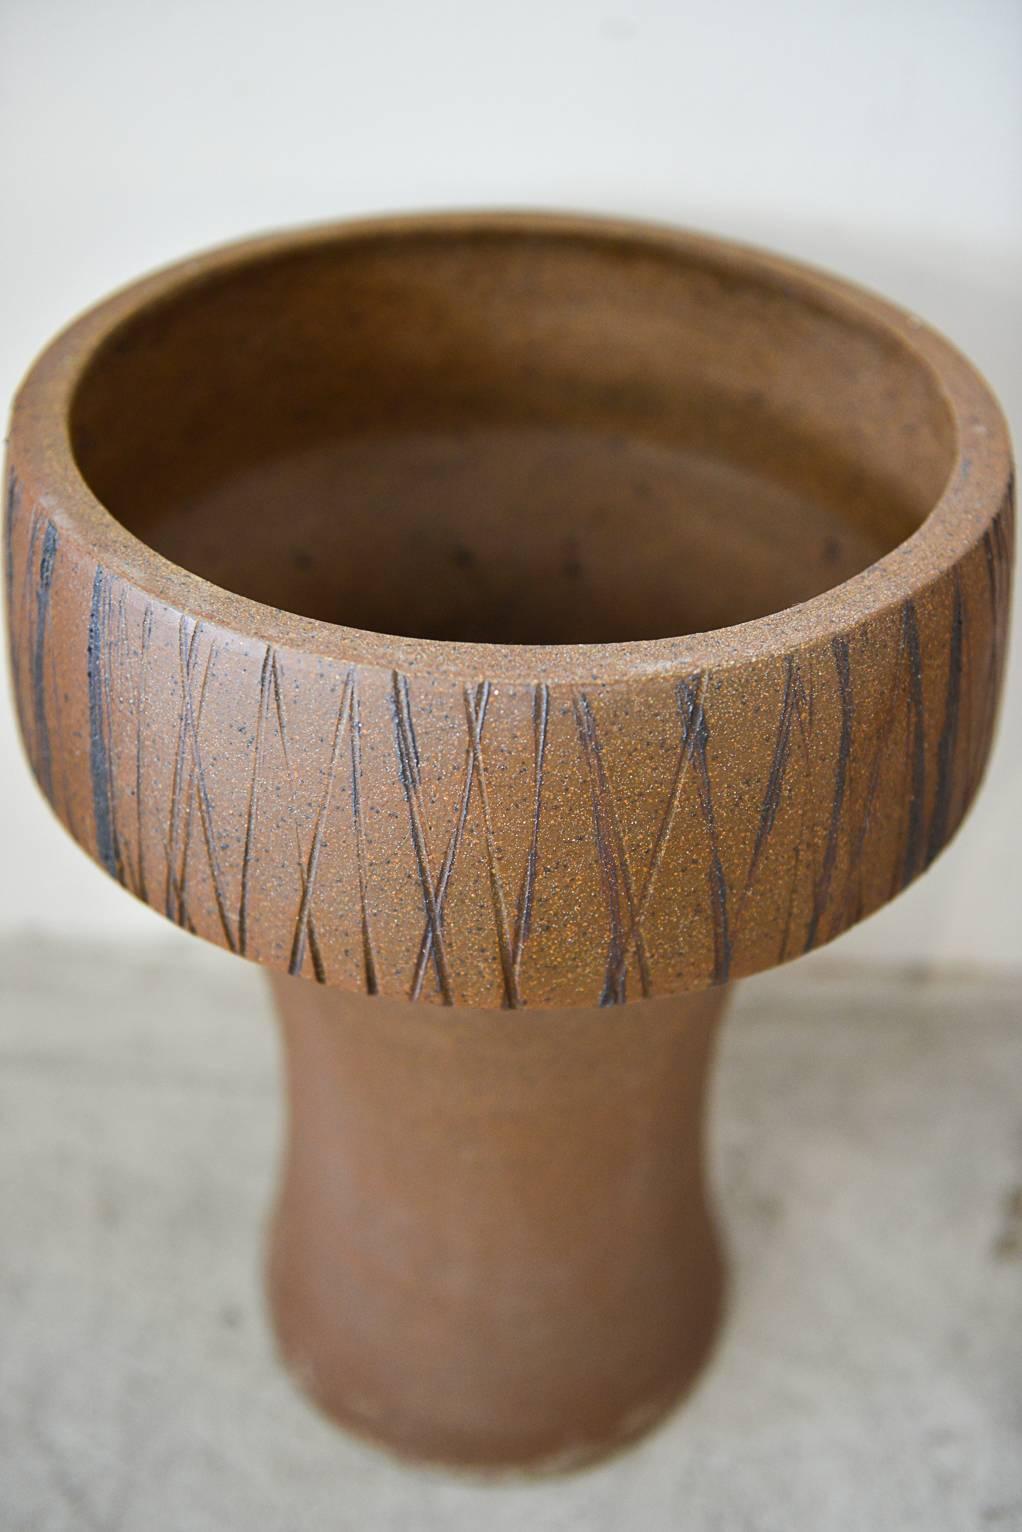 Beautiful incised rim planter by Marilyn Kay Austin for Architectural Pottery Pro Artisan collection in rare brown speckle glaze with incised upper edge. Rare color/design combo in beautiful vintage condition. No drain holes, great patina. One very